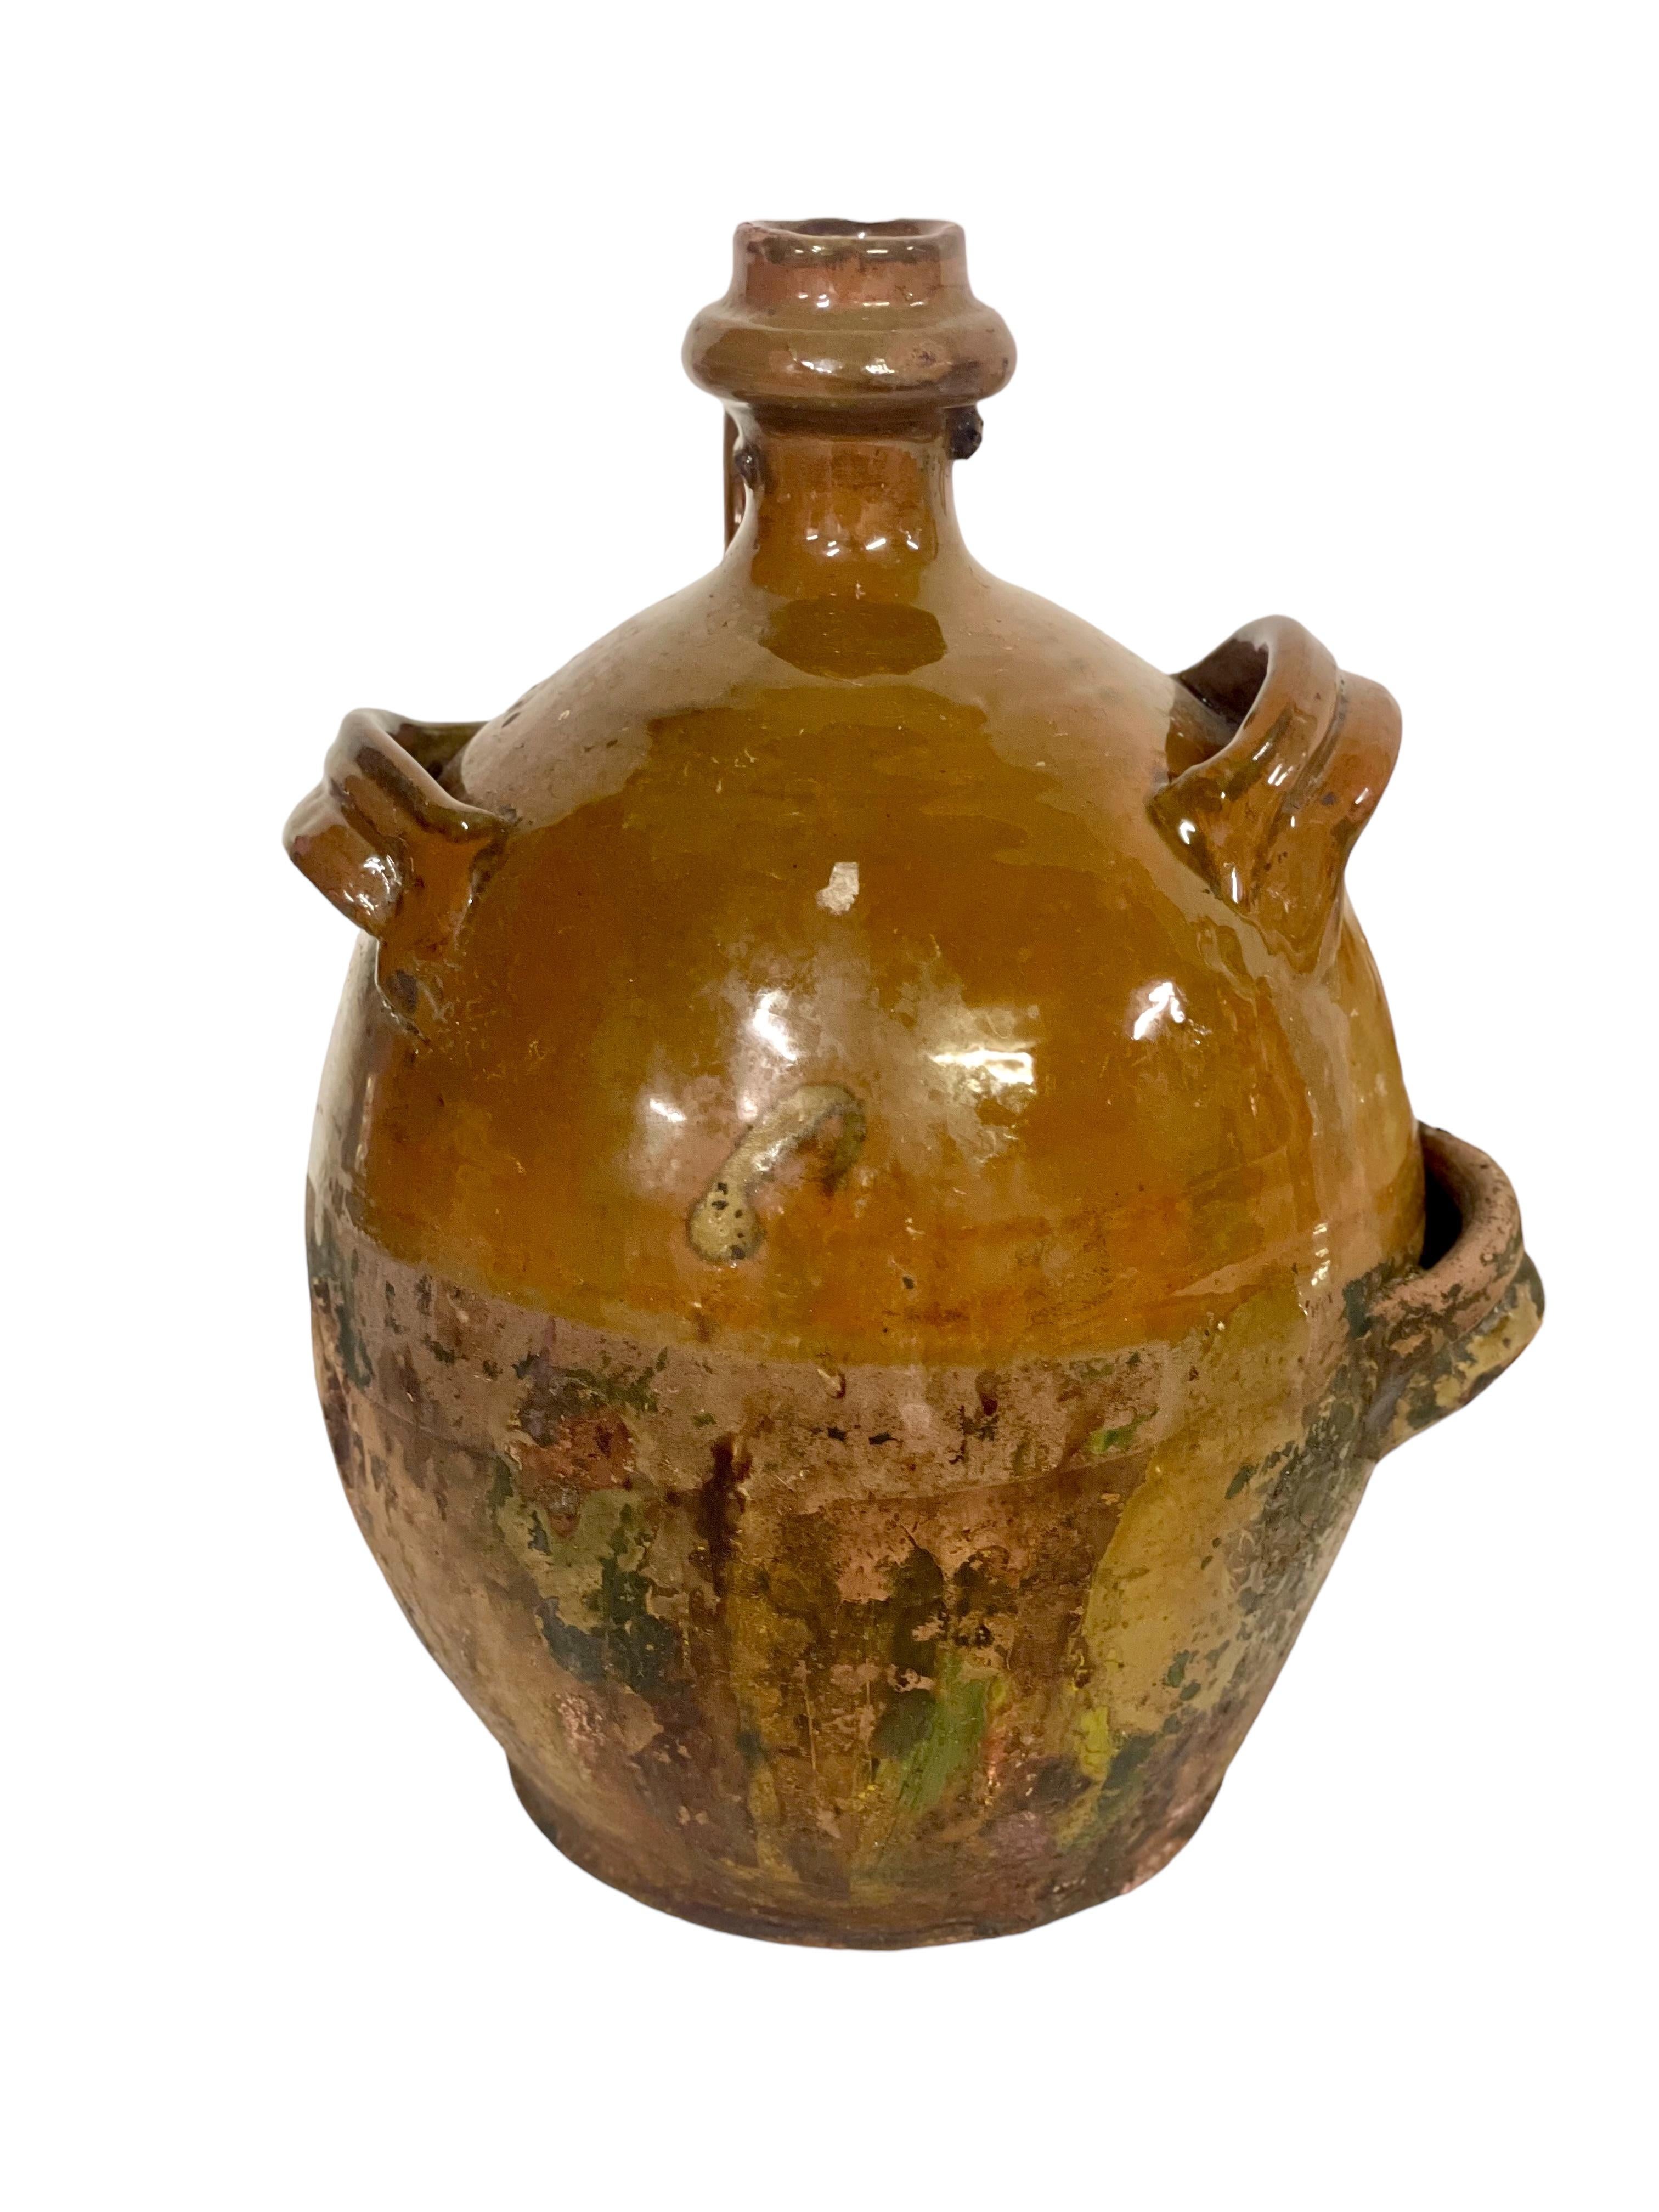 A gorgeous antique terracotta olive oil jar, or gourd, dating from the 19th century, complete with shaped, narrow top spout and side handle, as well as three additional handle 'straps' to keep the vessel steady while pouring. Originating from